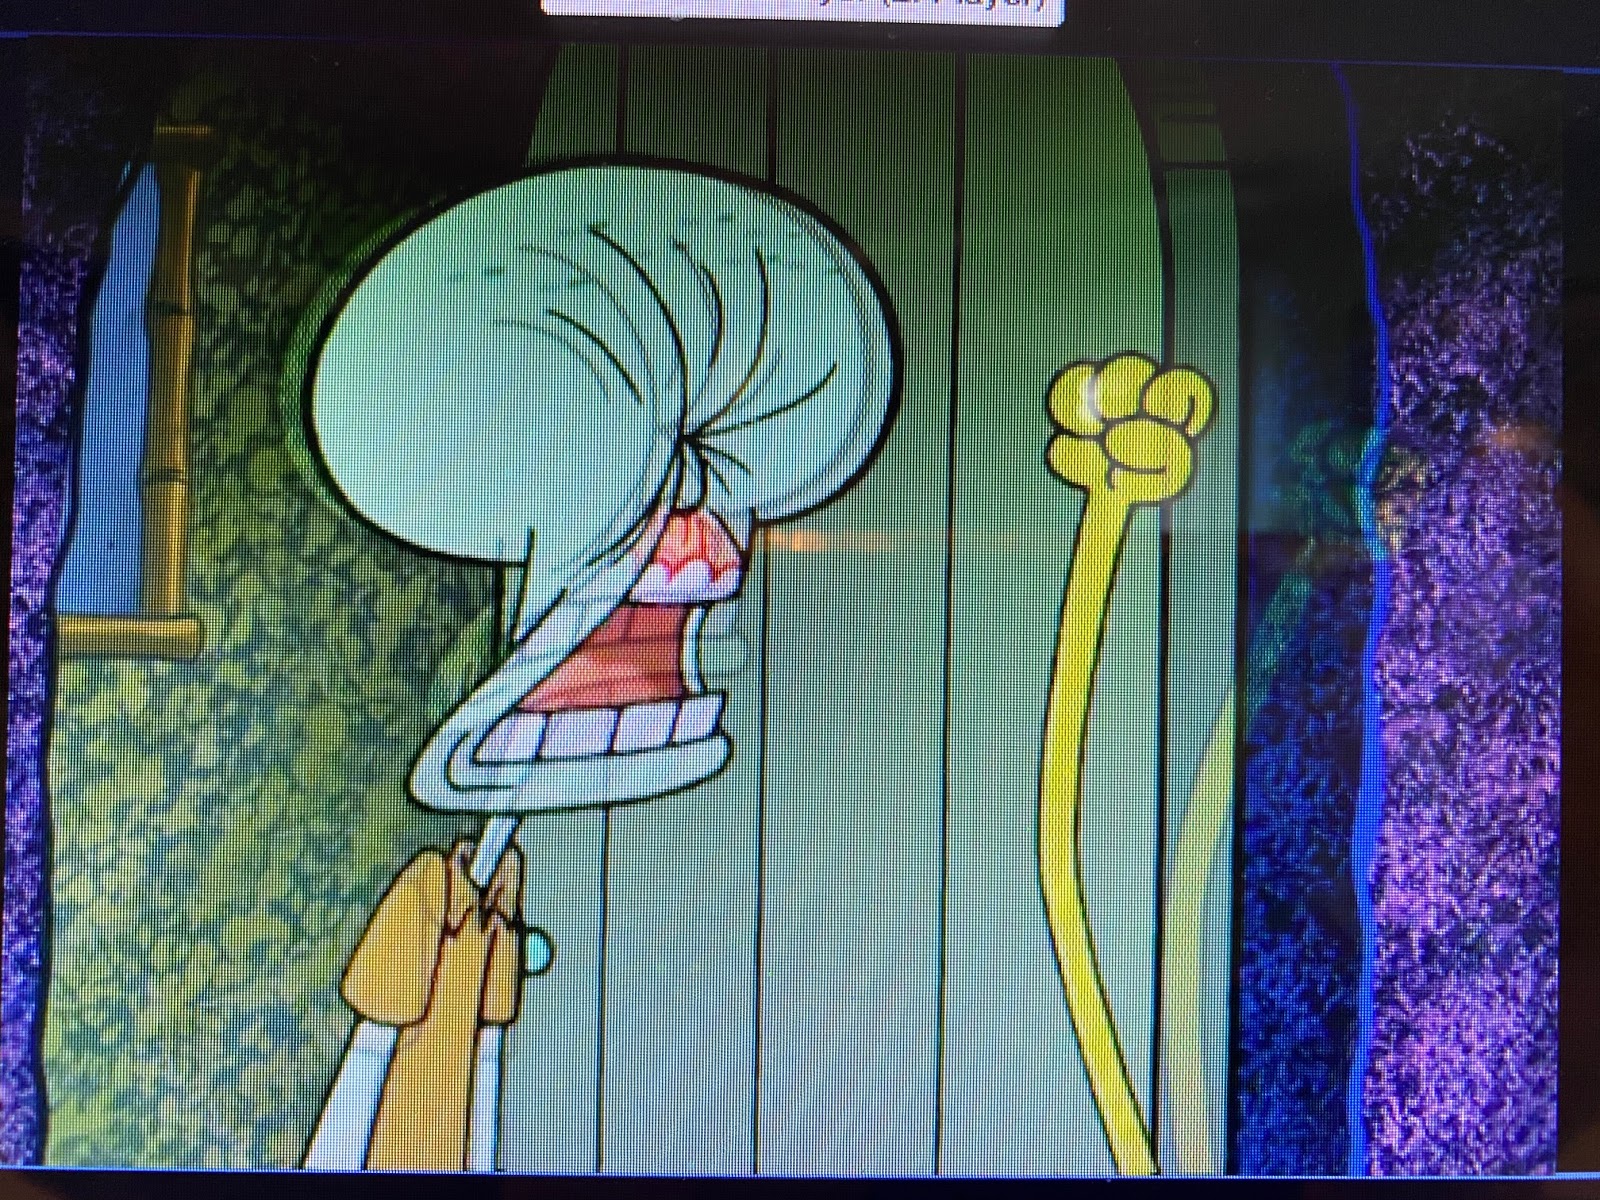 Squidward's punched Face